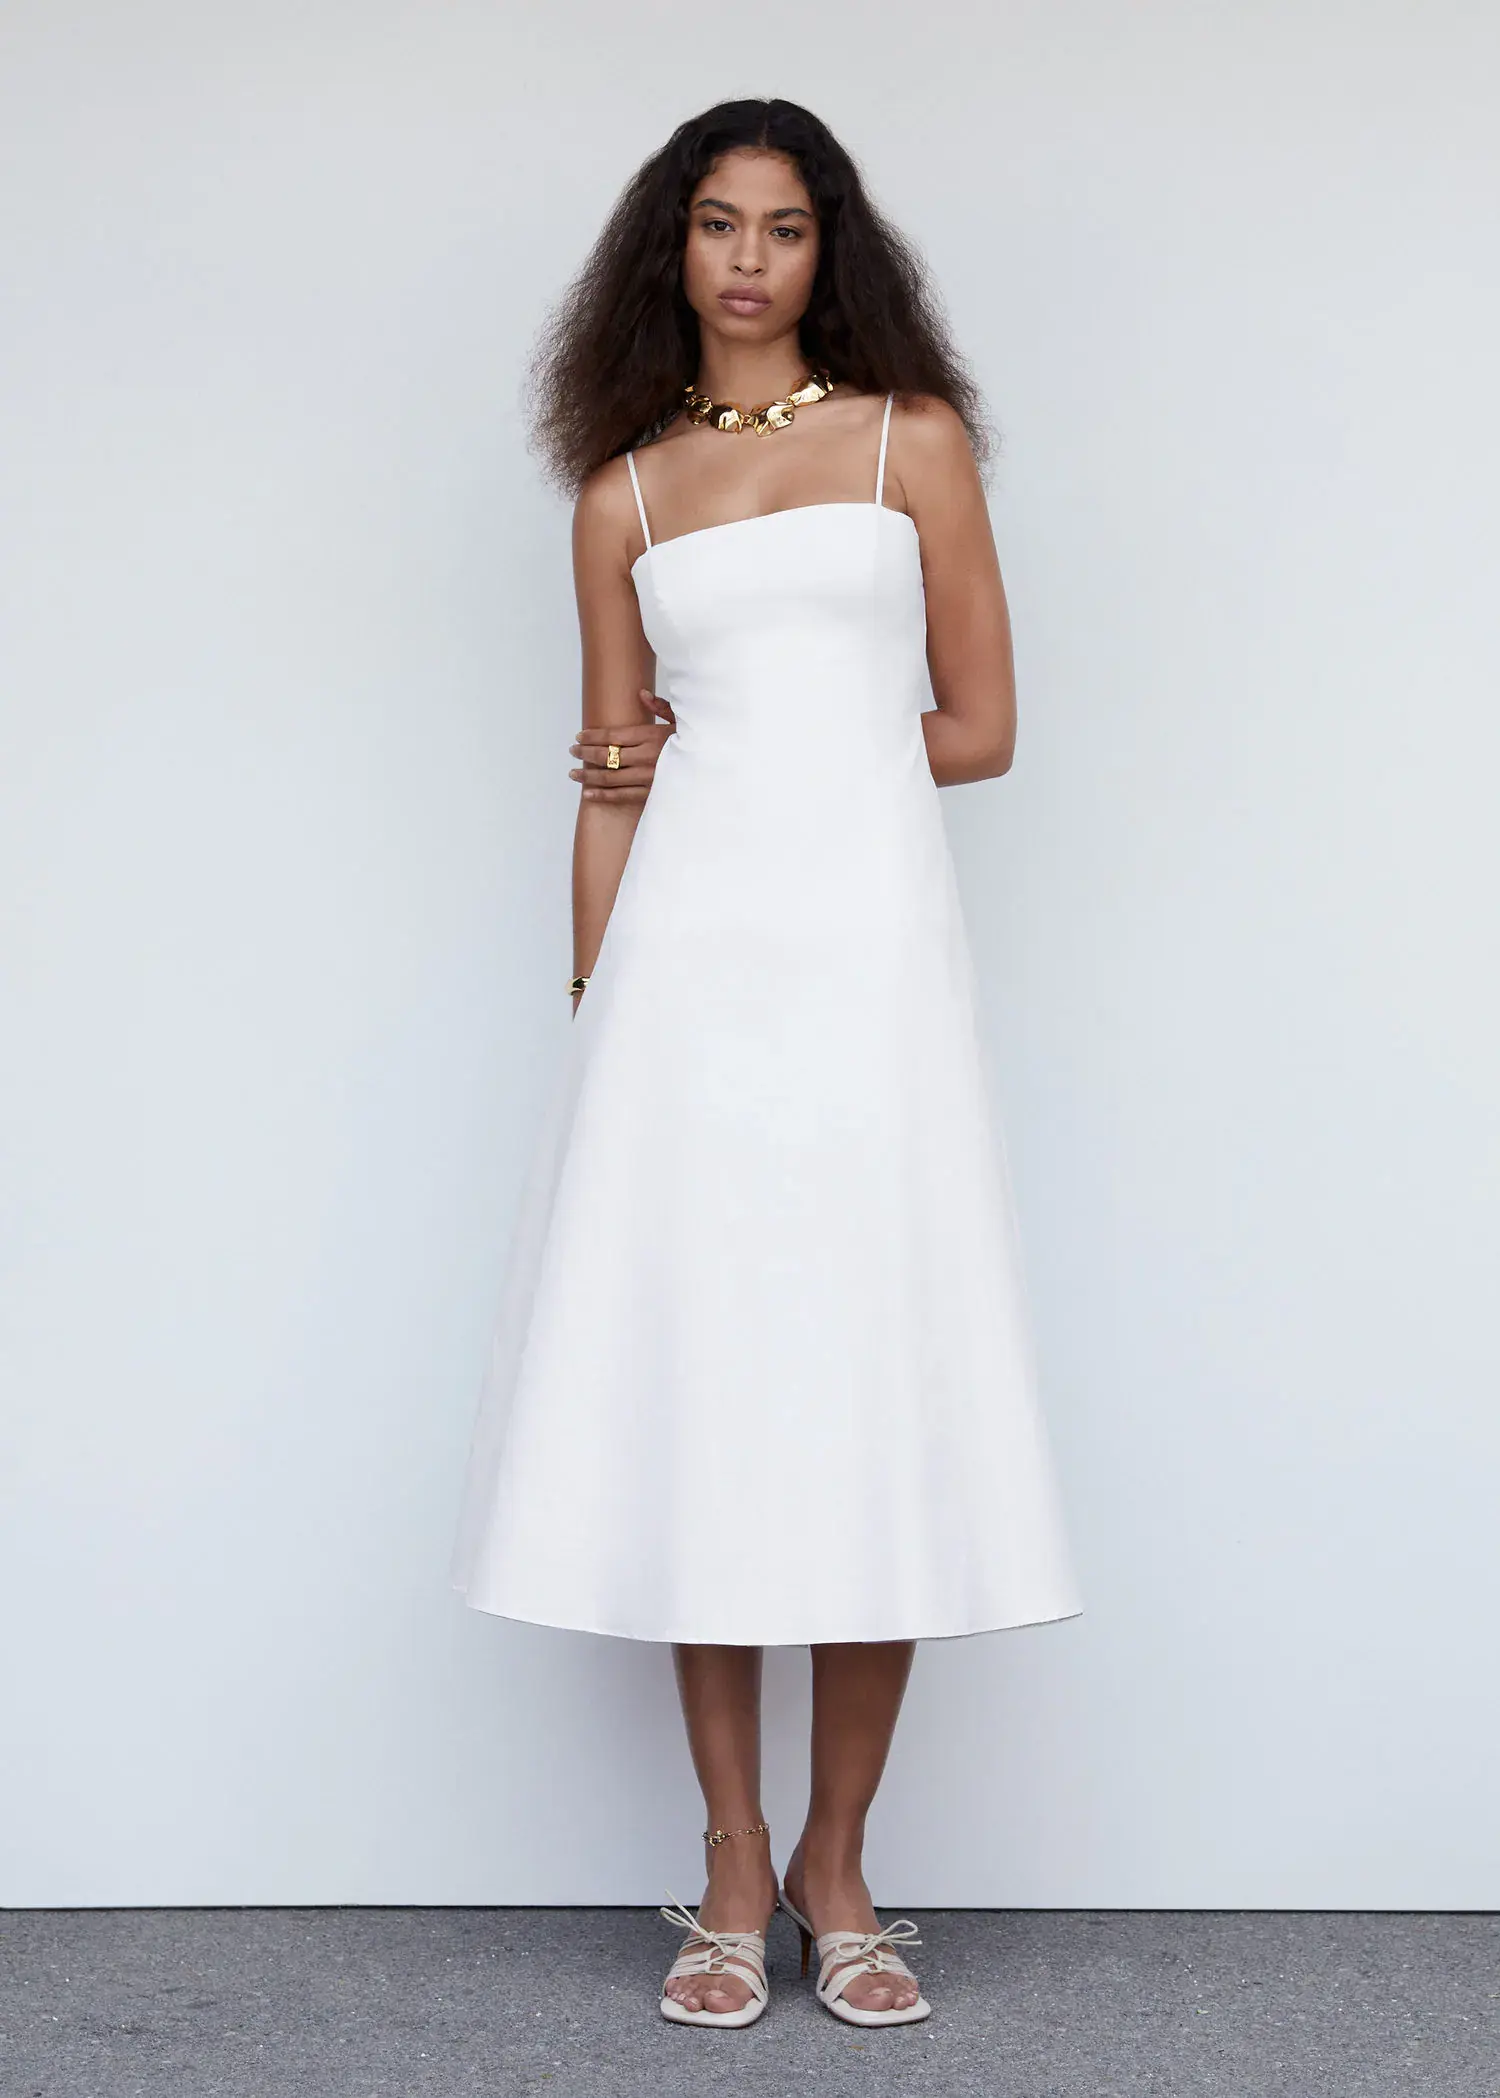 Mango Midi-dress with back detail. a woman in a white dress standing in front of a white wall. 